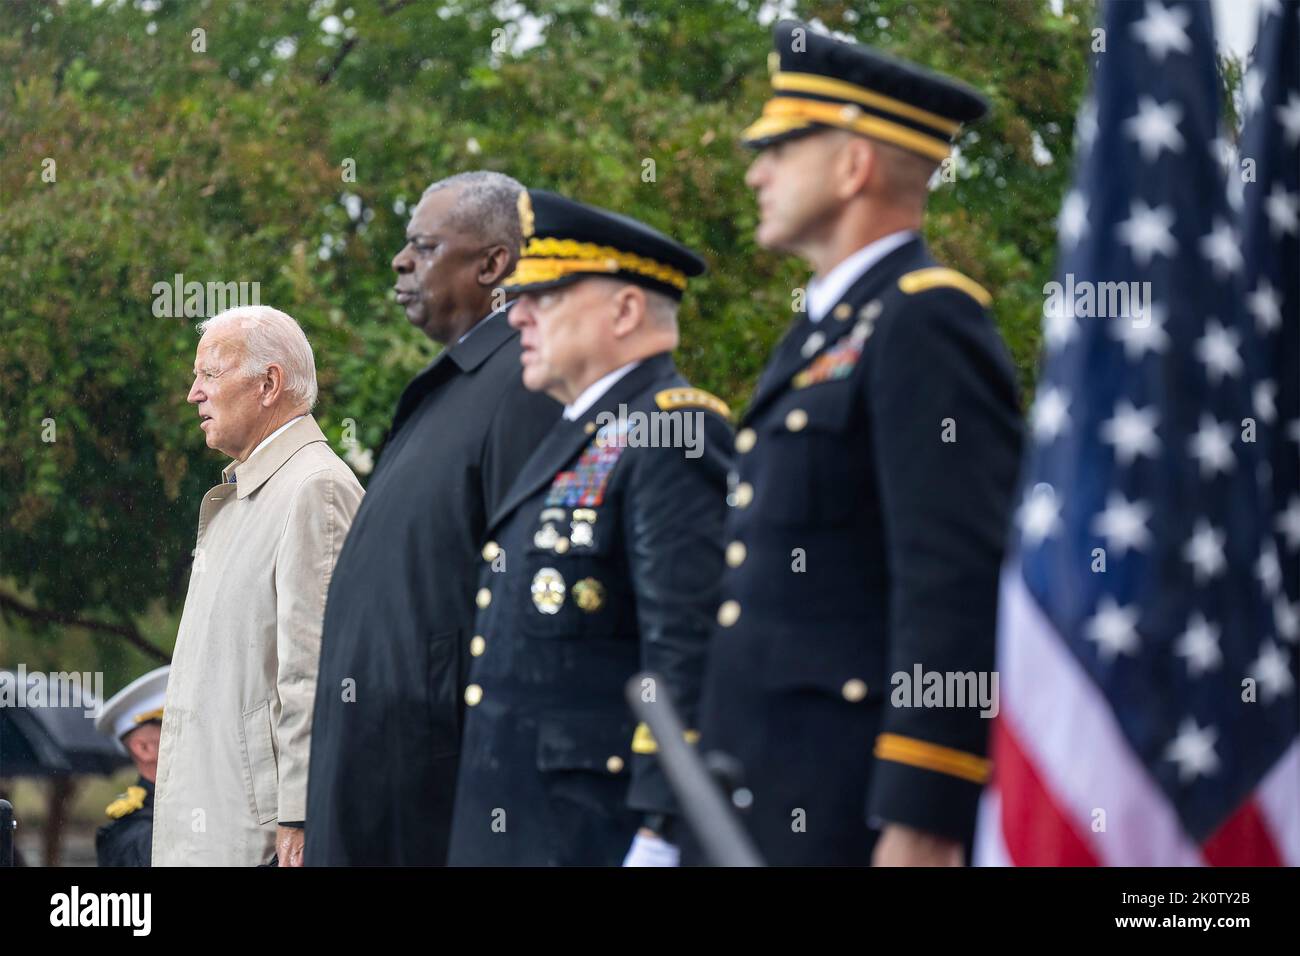 Washington, United States of America. 11 September, 2022. U.S President Joe Biden, left, stands during the ceremony remembering the victims of the 9/11 attacks on the 21st anniversary at the Pentagon, September 11, 2022 in Arlington, Virginia. Standing left to right are: President Joe Biden, Secretary of Defense Lloyd Austin, Chairman of the Joint Chiefs Gen. Mark Milley and Maj. Gen. Allan M. Pepin, commanding general, National Capital Region.  Credit: Adam Schultz/White House Photo/Alamy Live News Stock Photo